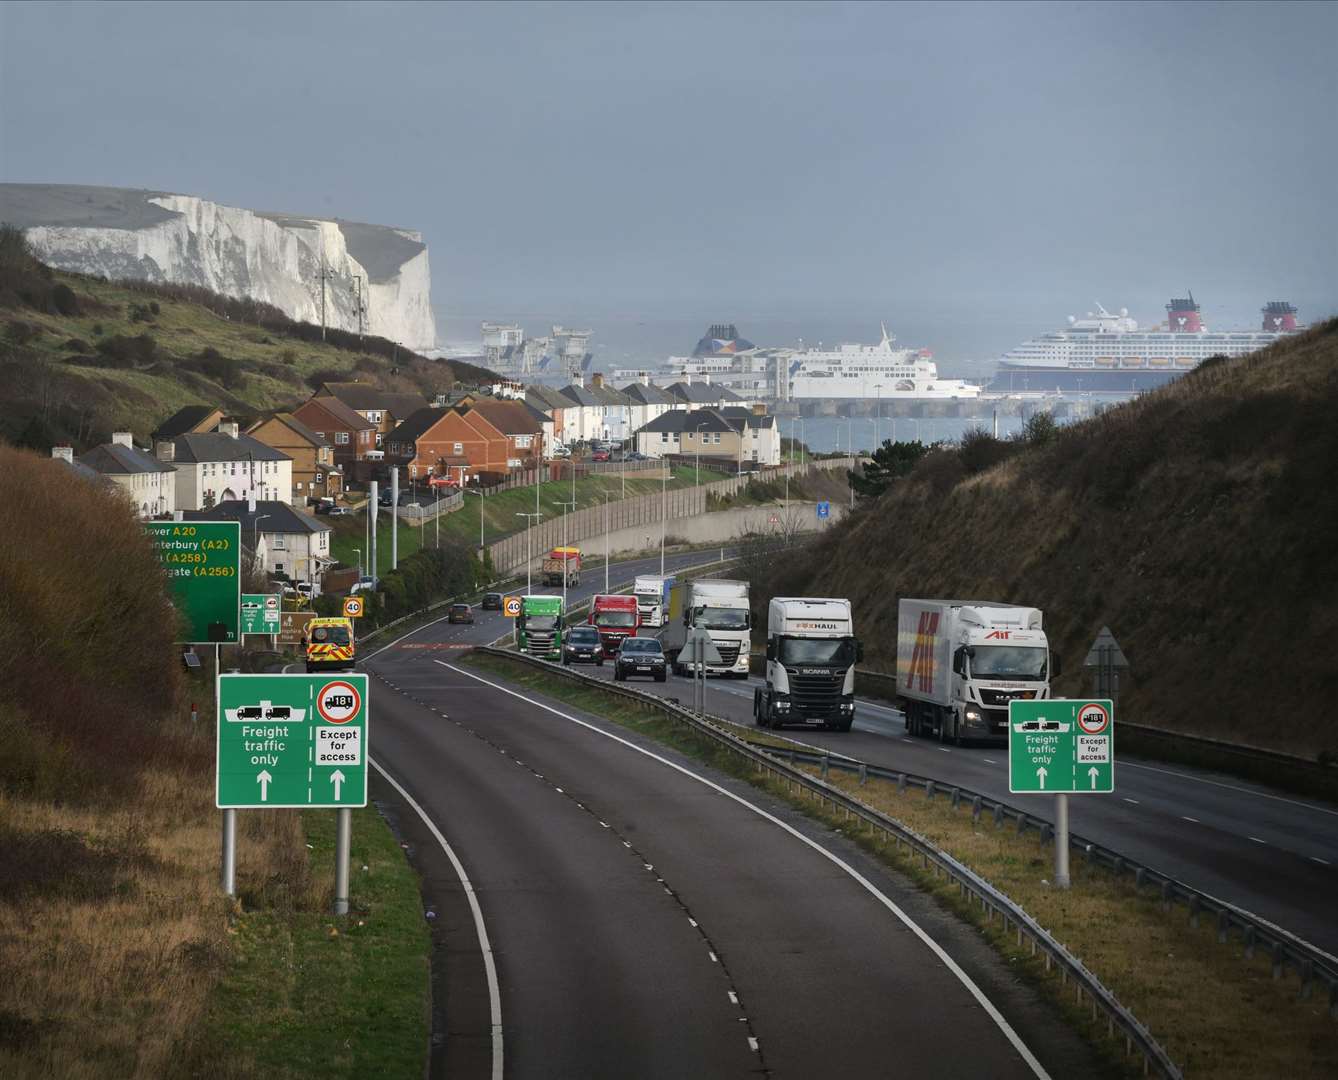 The Port of Dover - the closest part of the UK to France. Picture: Getty Images